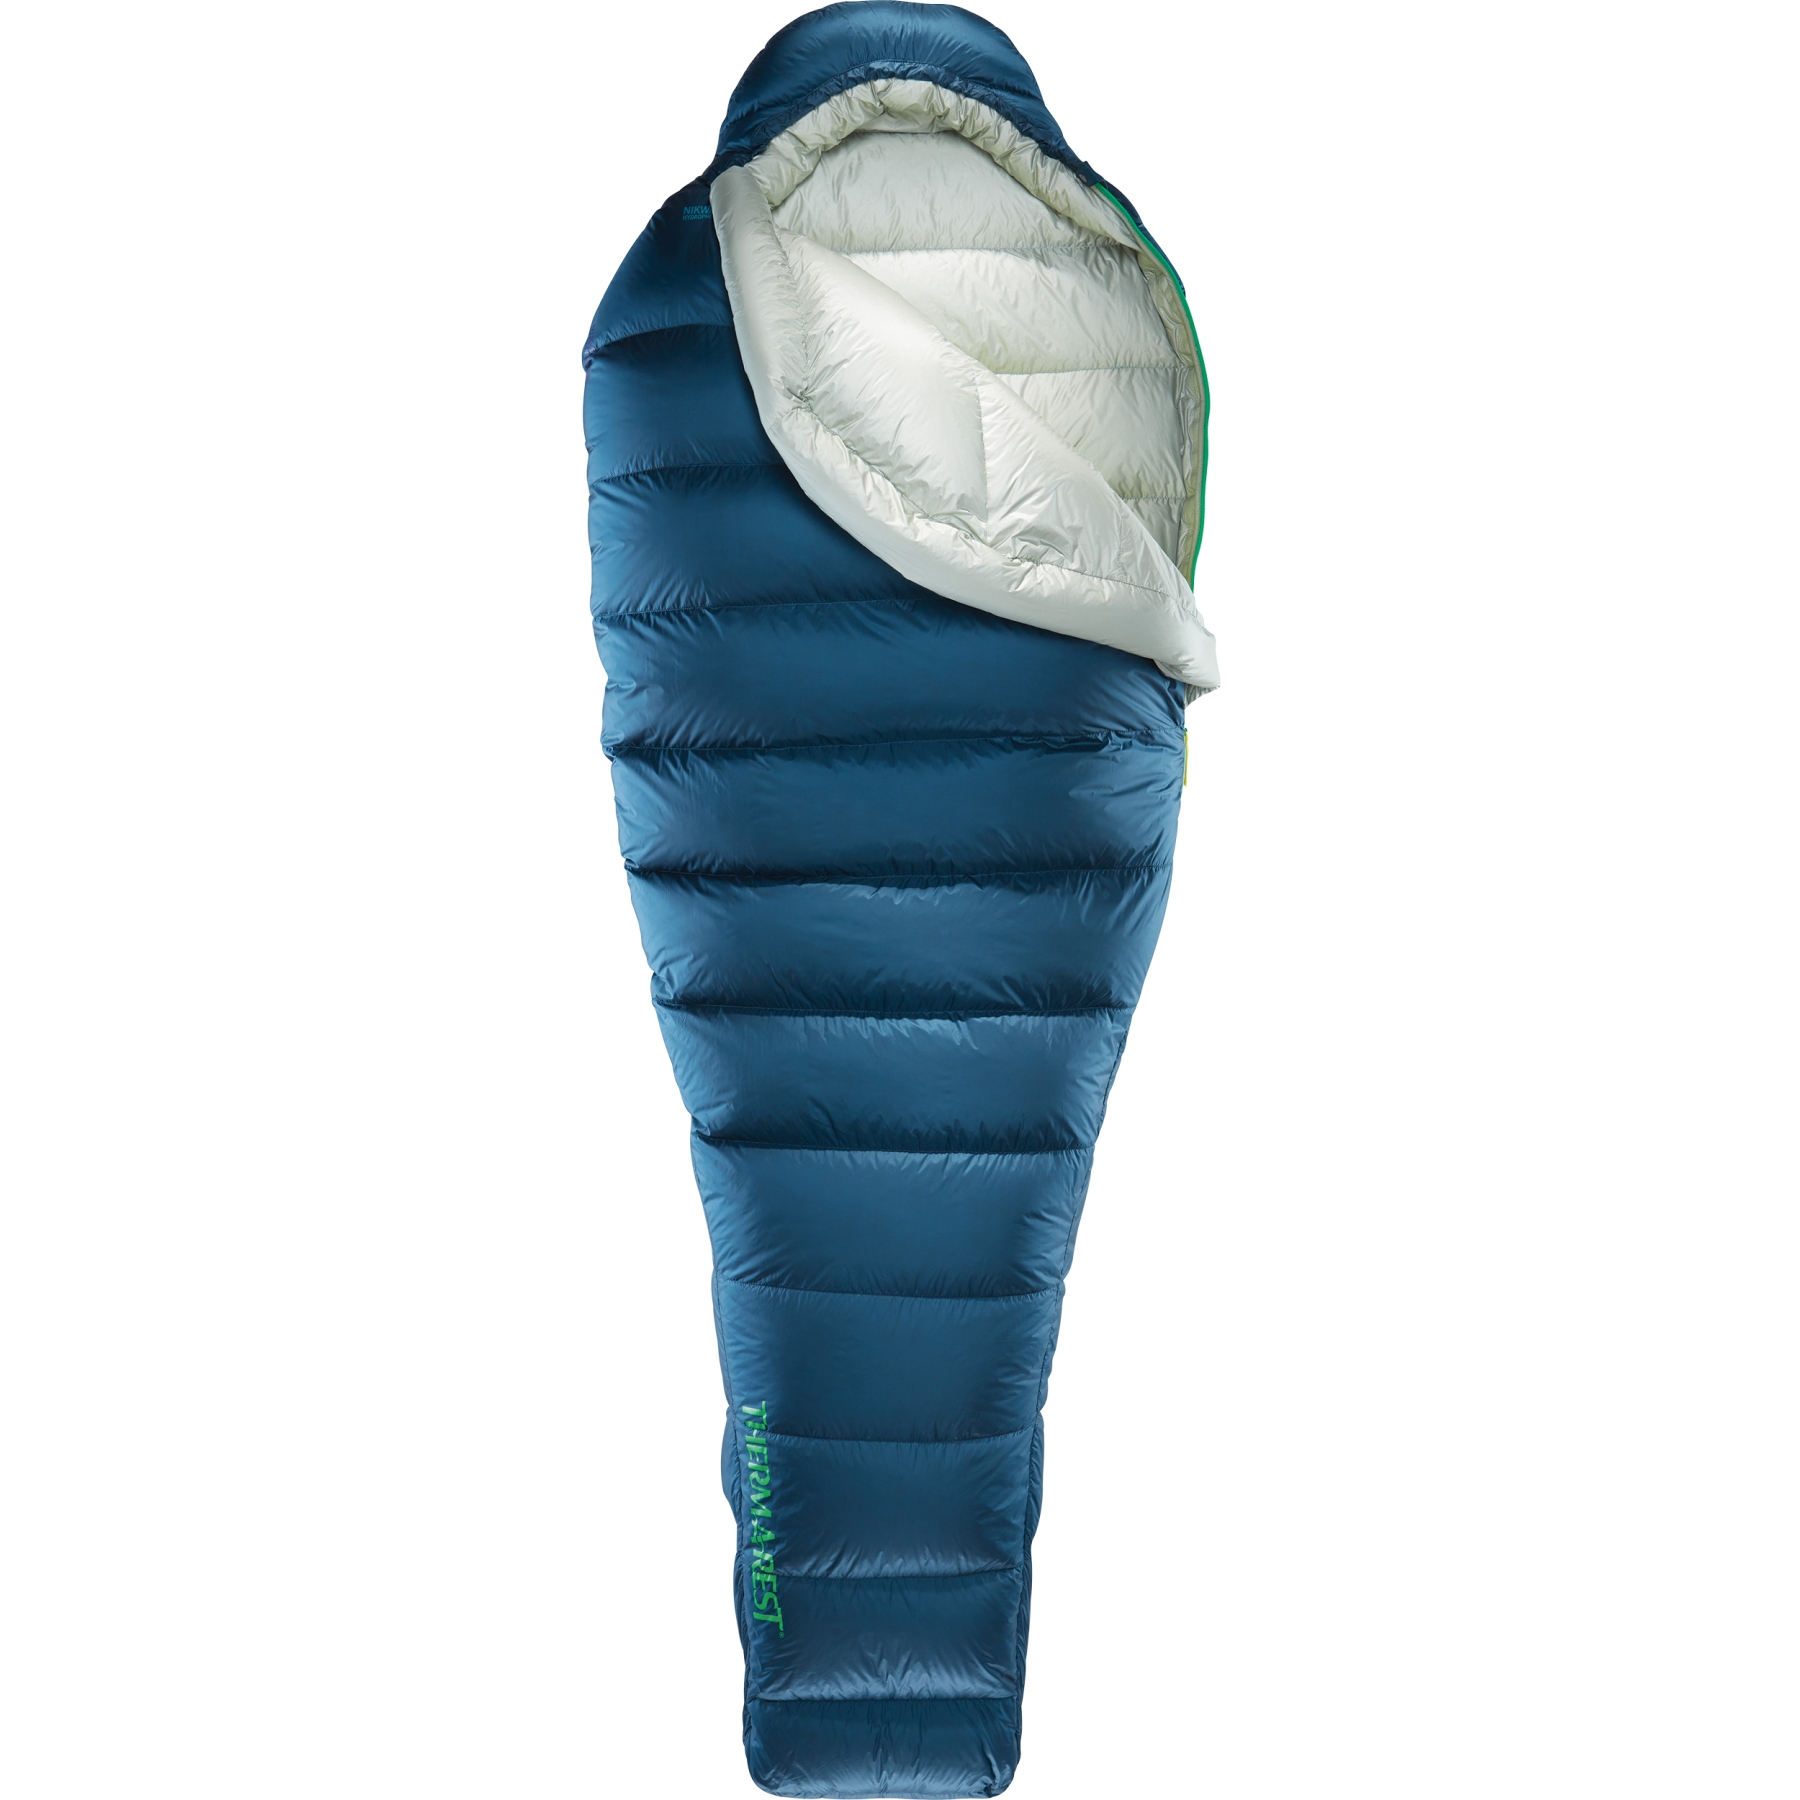 Image of Therm-a-Rest Hyperion 20F/-6C UL Sleeping Bag - Long | Deep Pacific